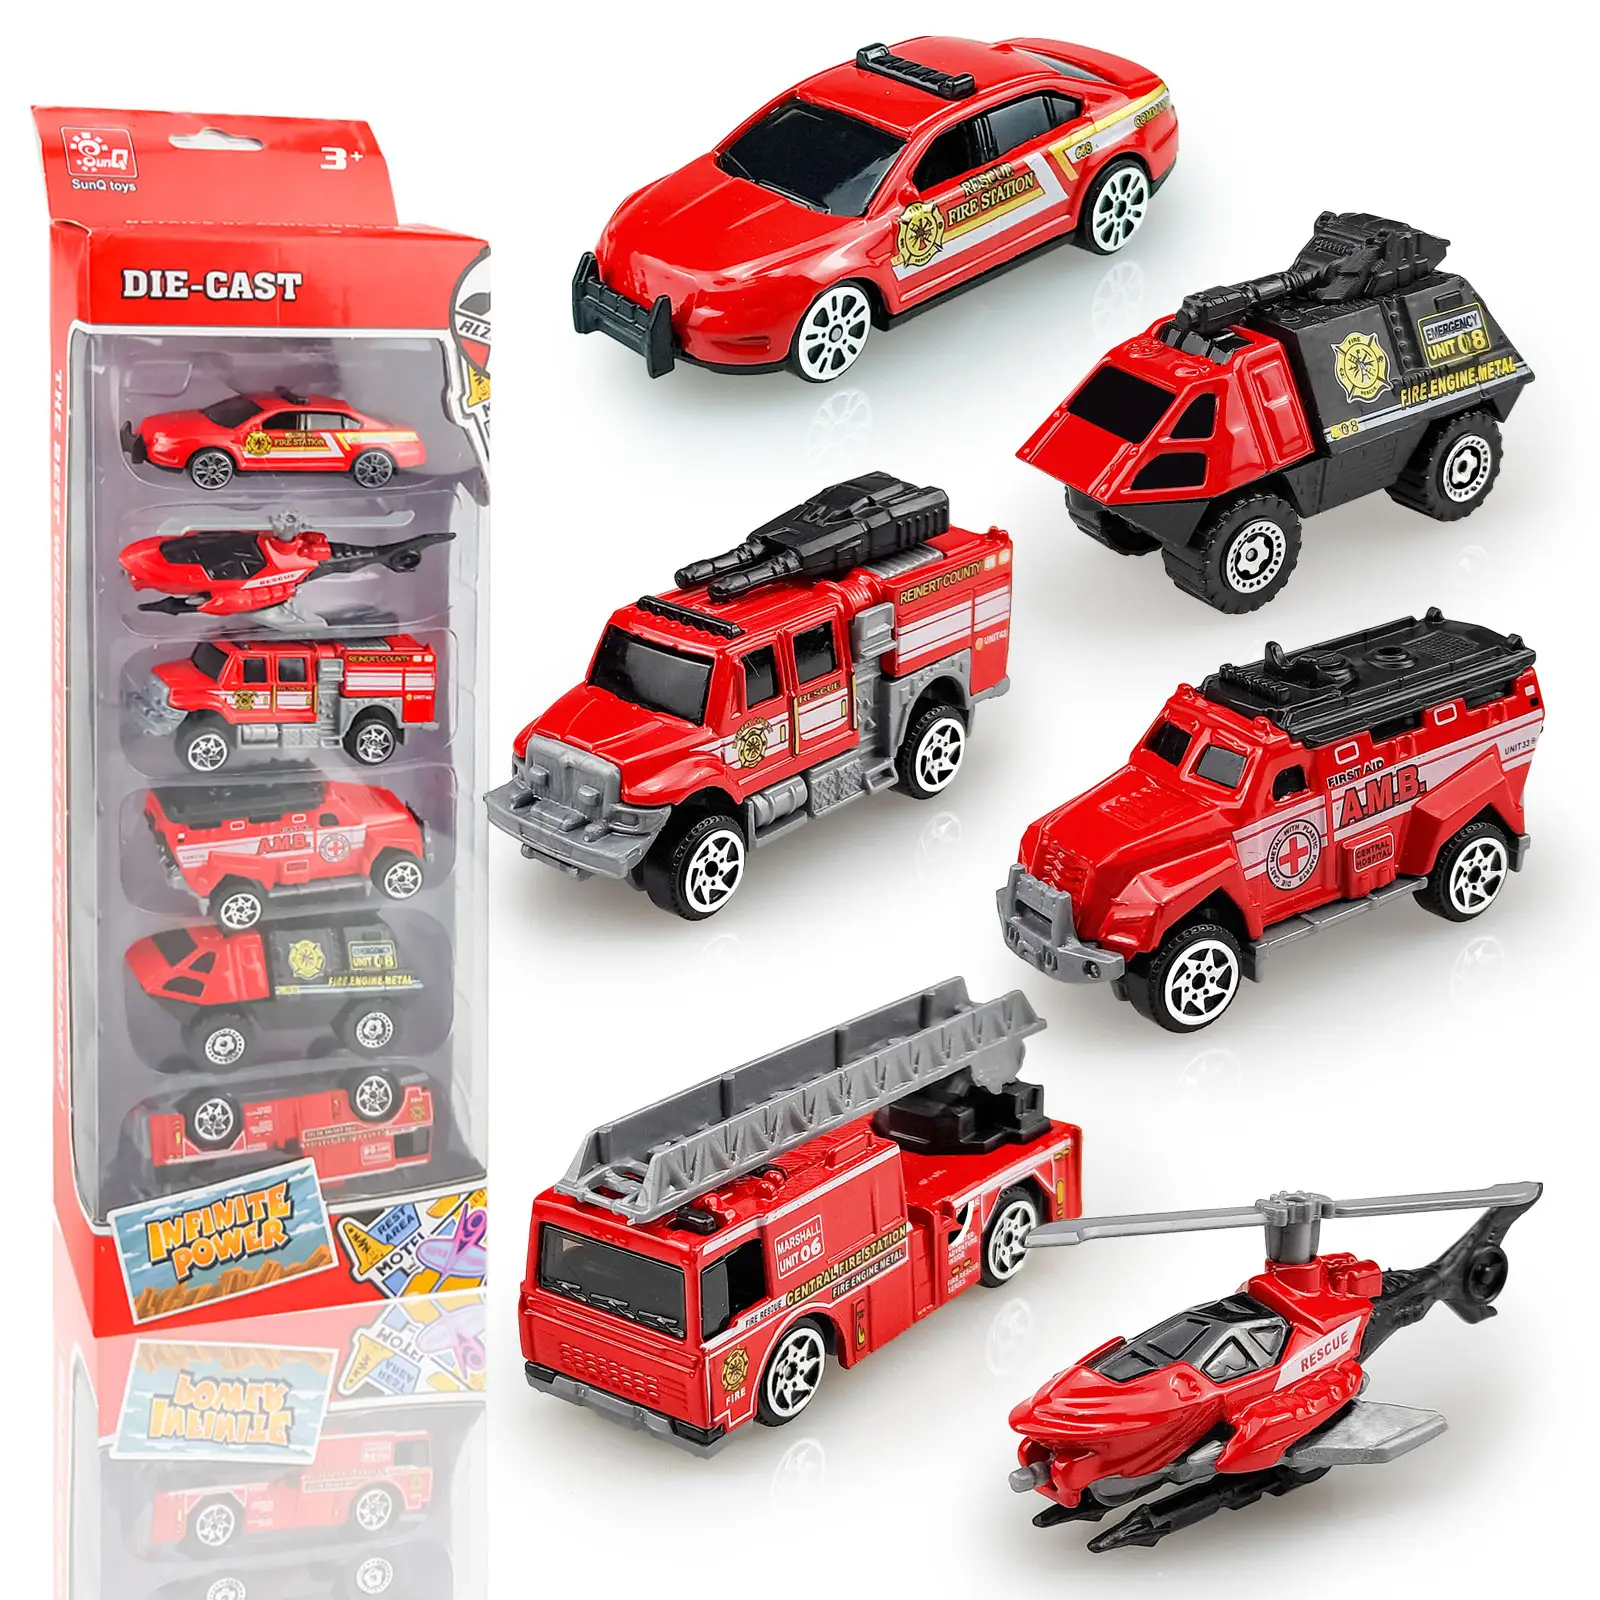 High Quality Wholesale Cheap children's toy diecast car model metal vehicle toy set alloy fire fighting truck toys